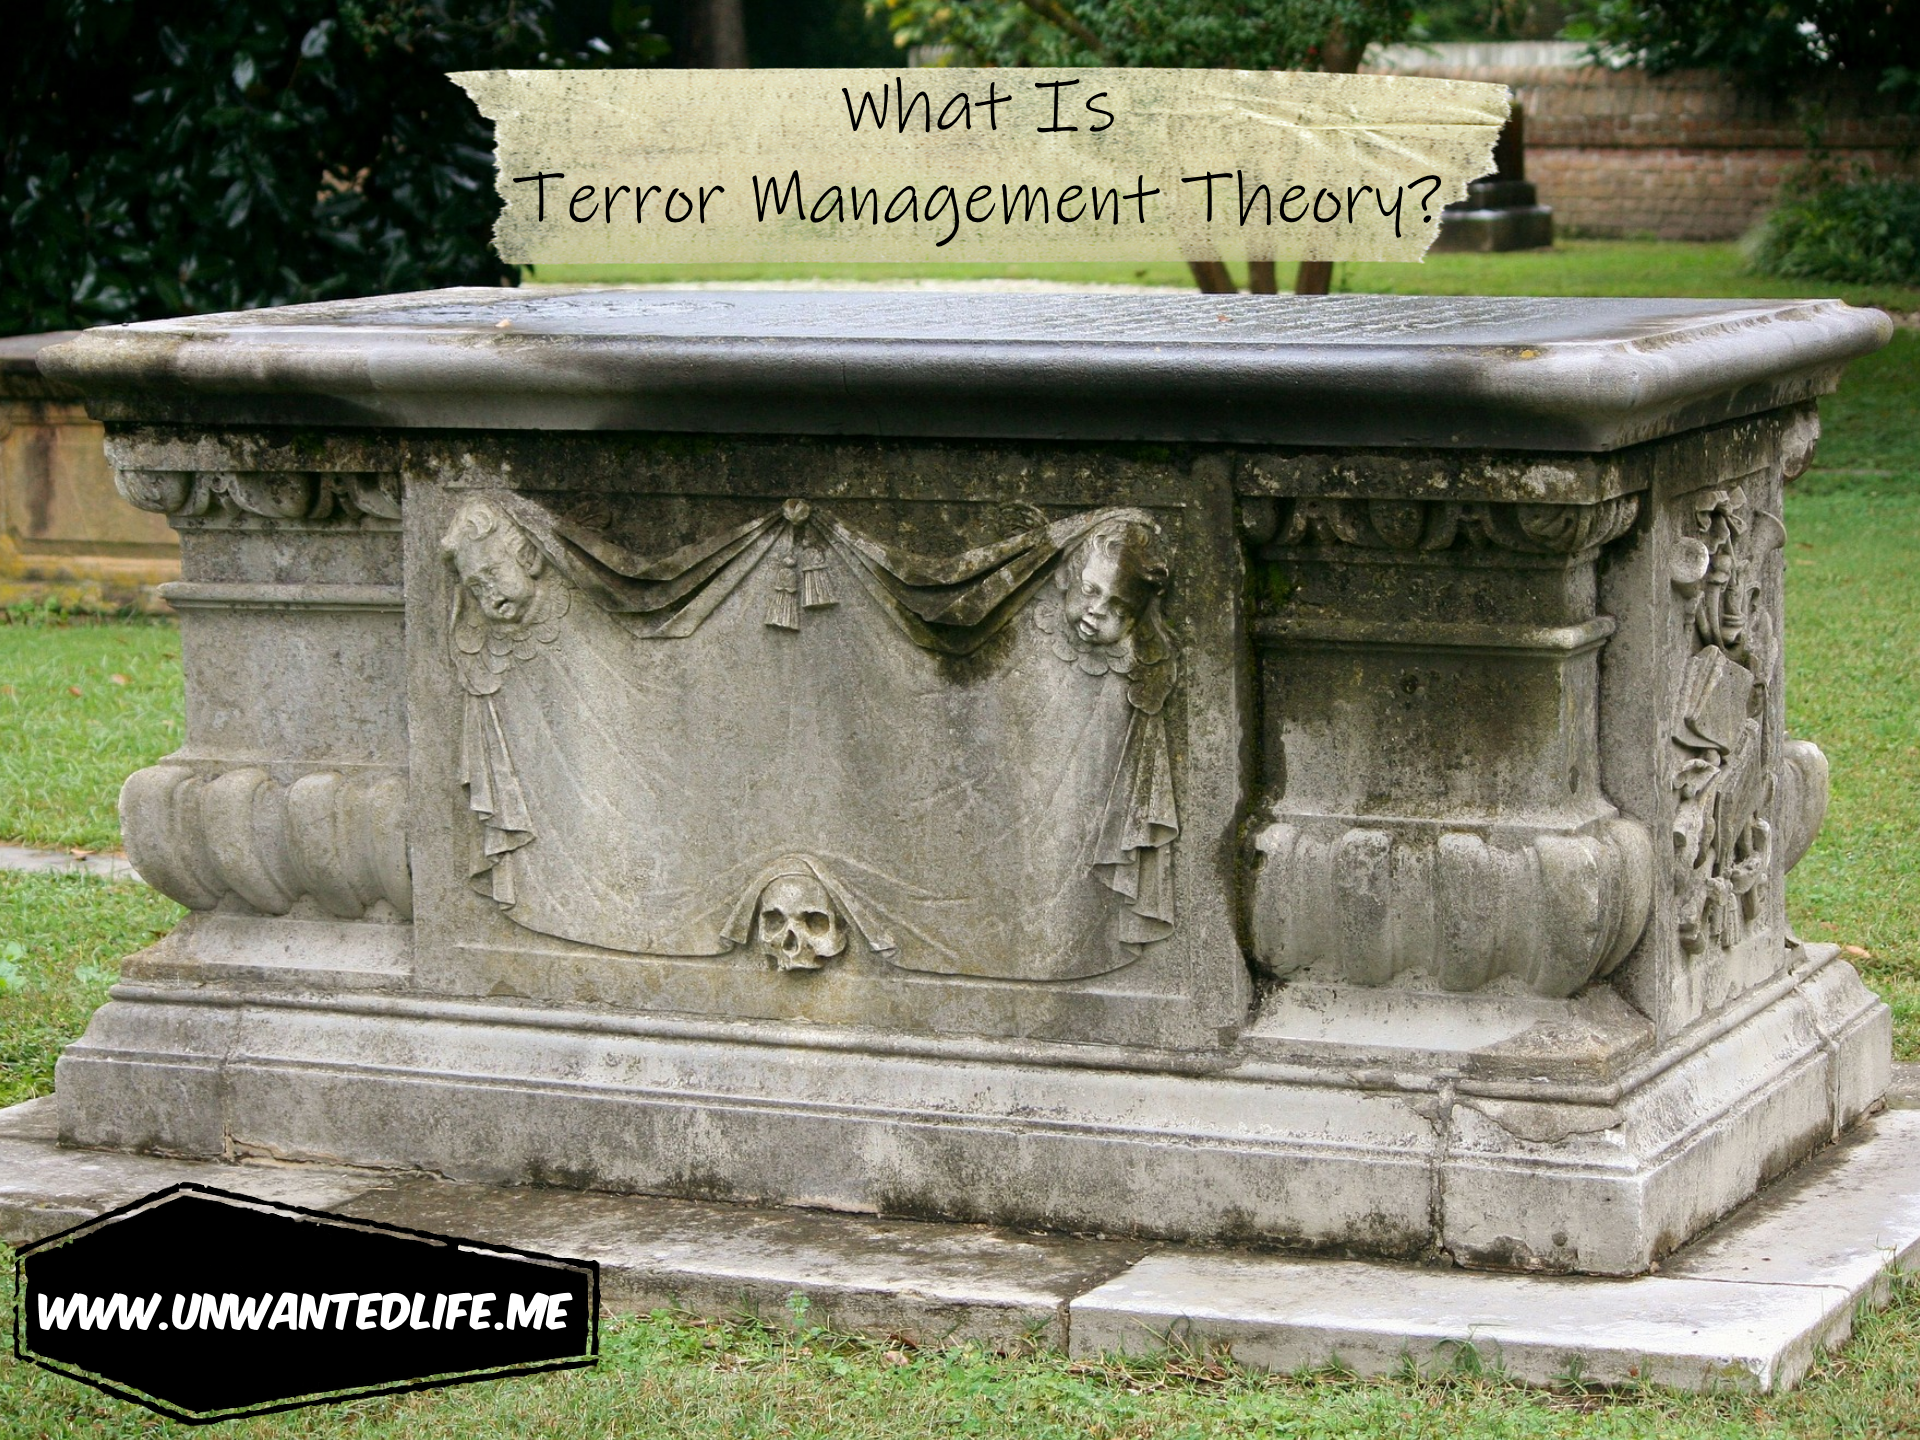 A photo of a grave stone to represent - What Is Terror Management Theory